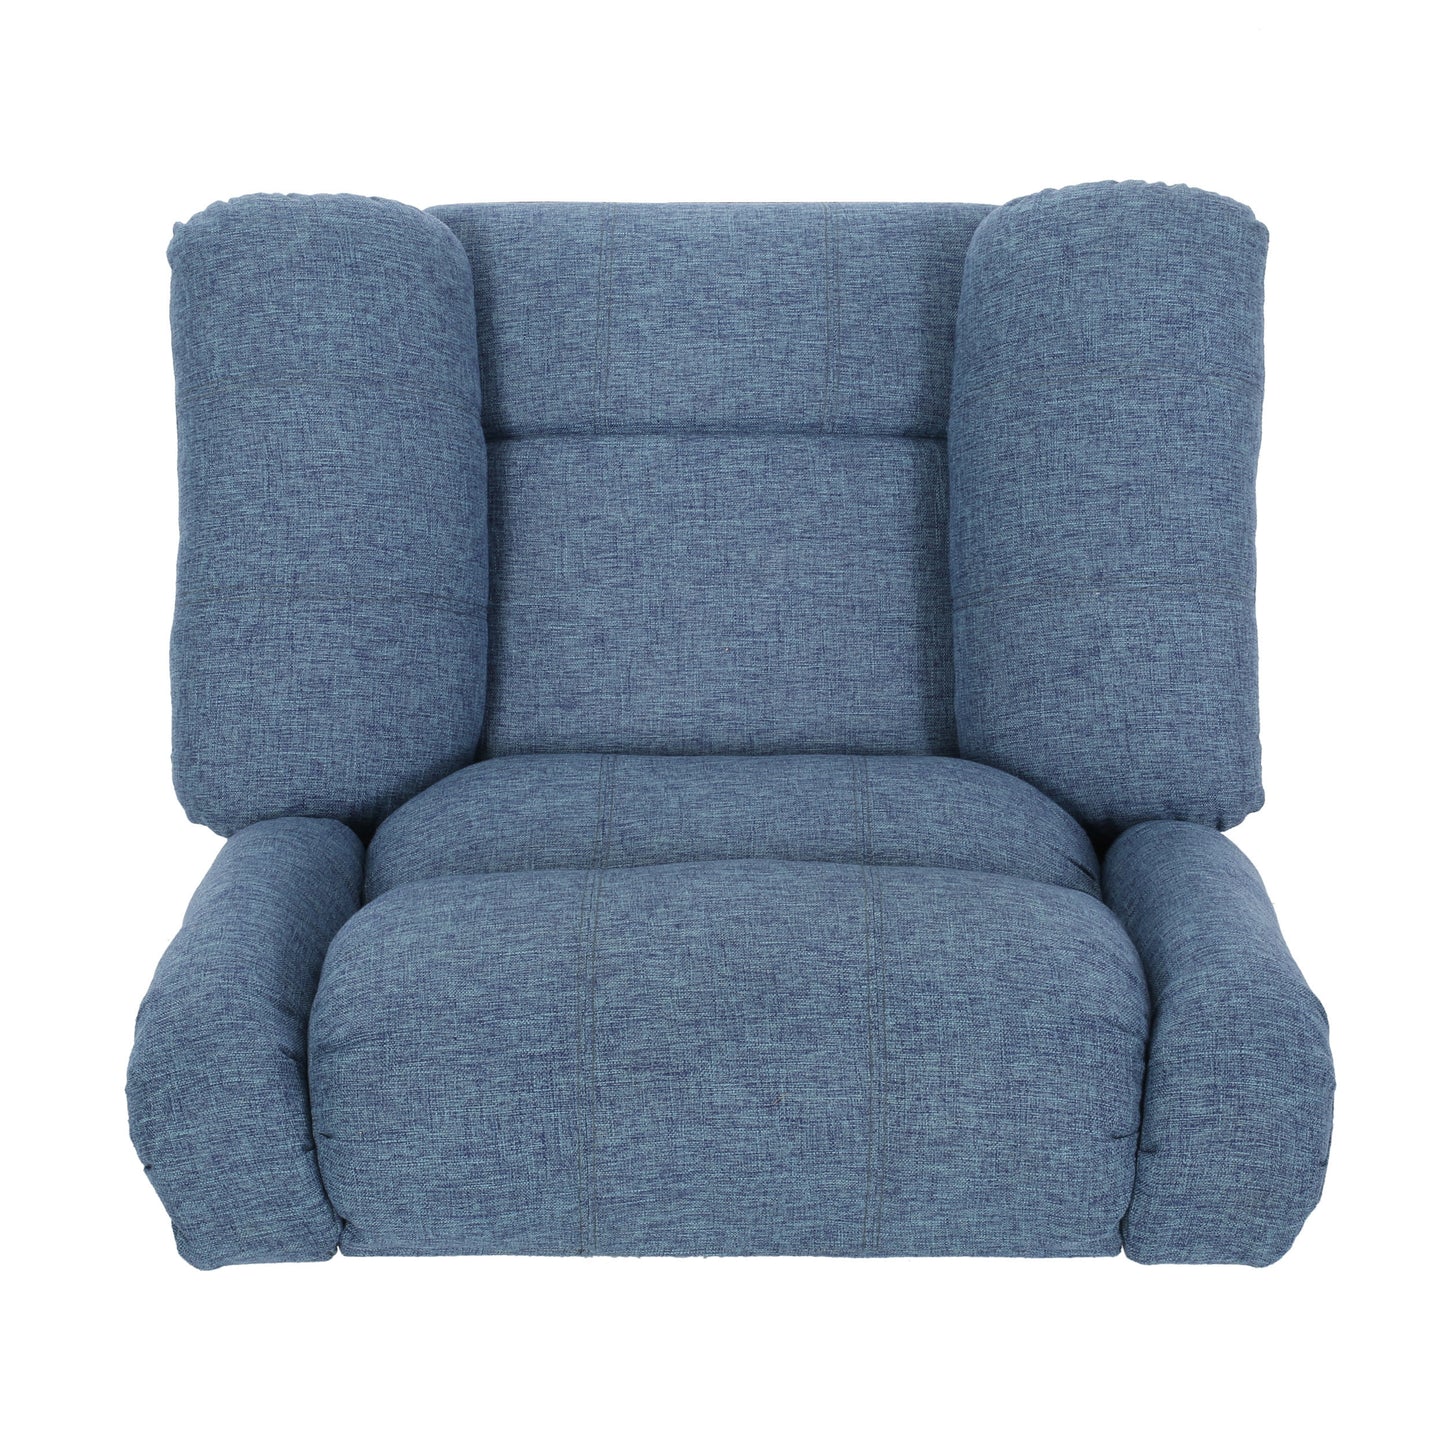 Fabric Gliding Recliner